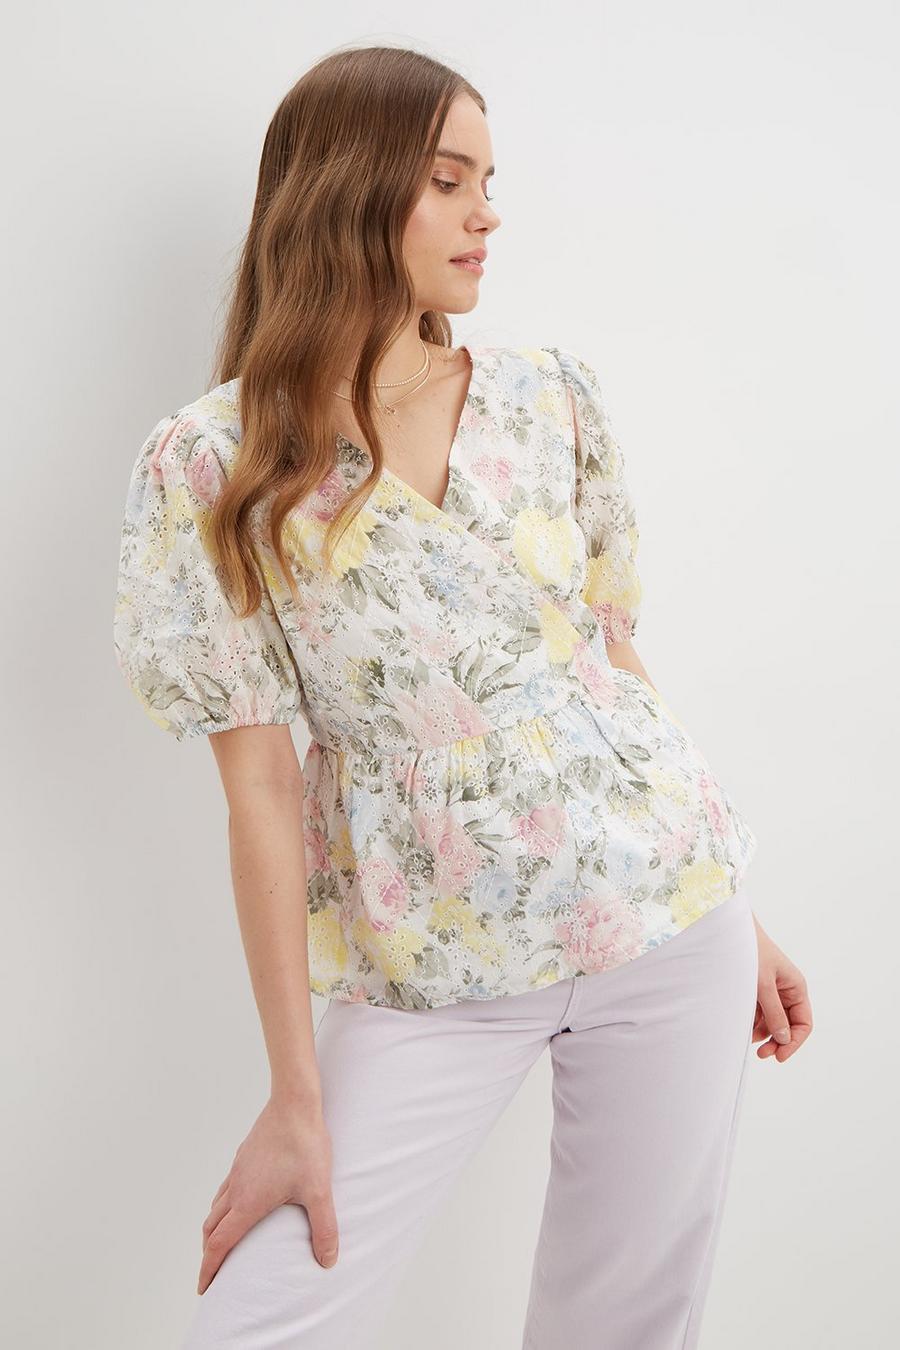 Broderie Tops | Broderie Anglaise Tops | Dorothy Perkins UK